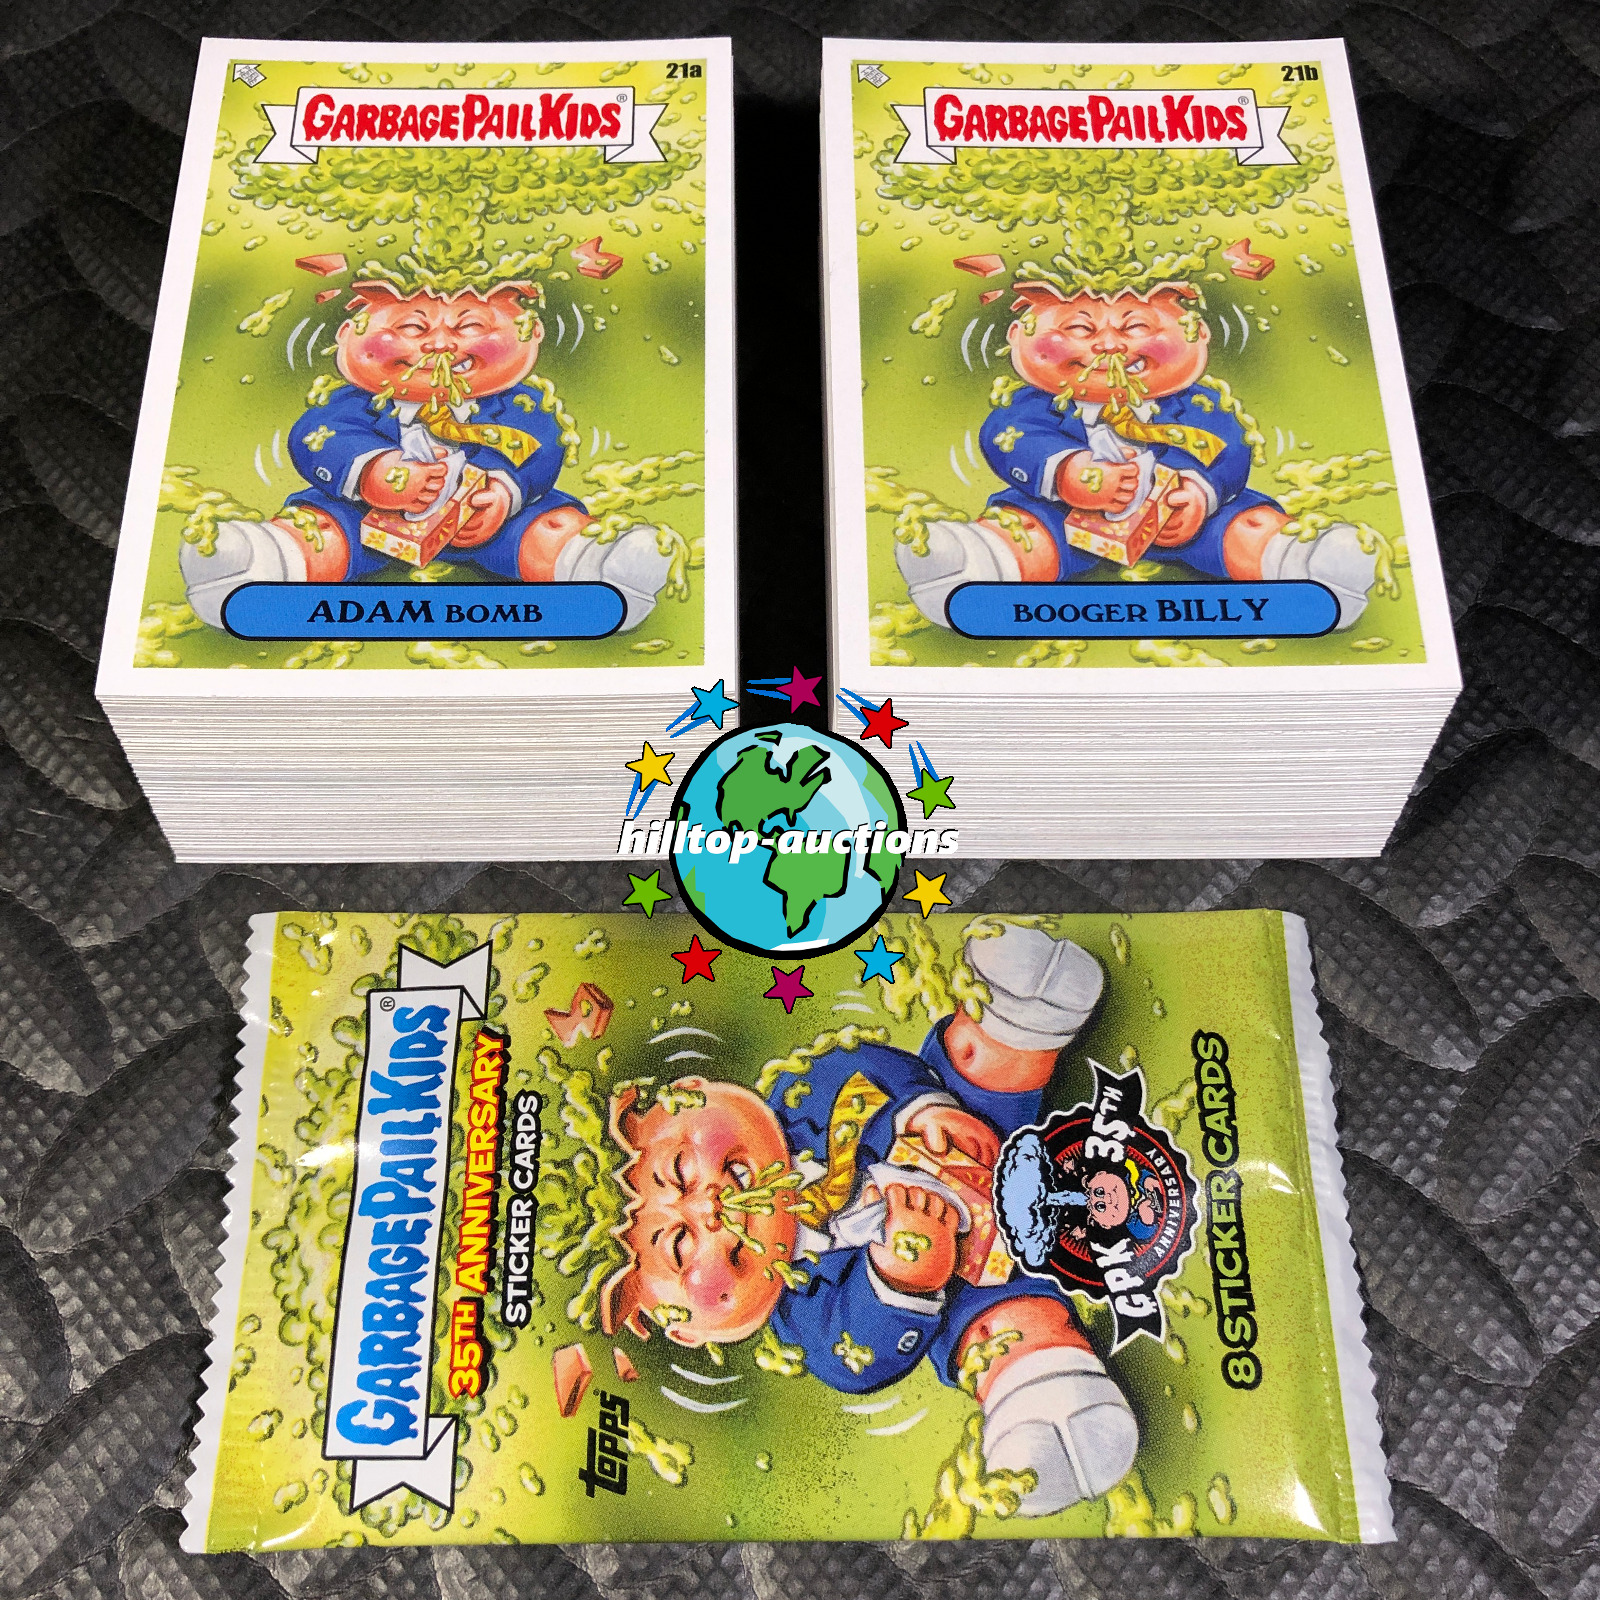 2020 GARBAGE PAIL KIDS 35th ANNIVERSARY 200-CARD COMPLETE BASE SET+WRAPPER+PROMO